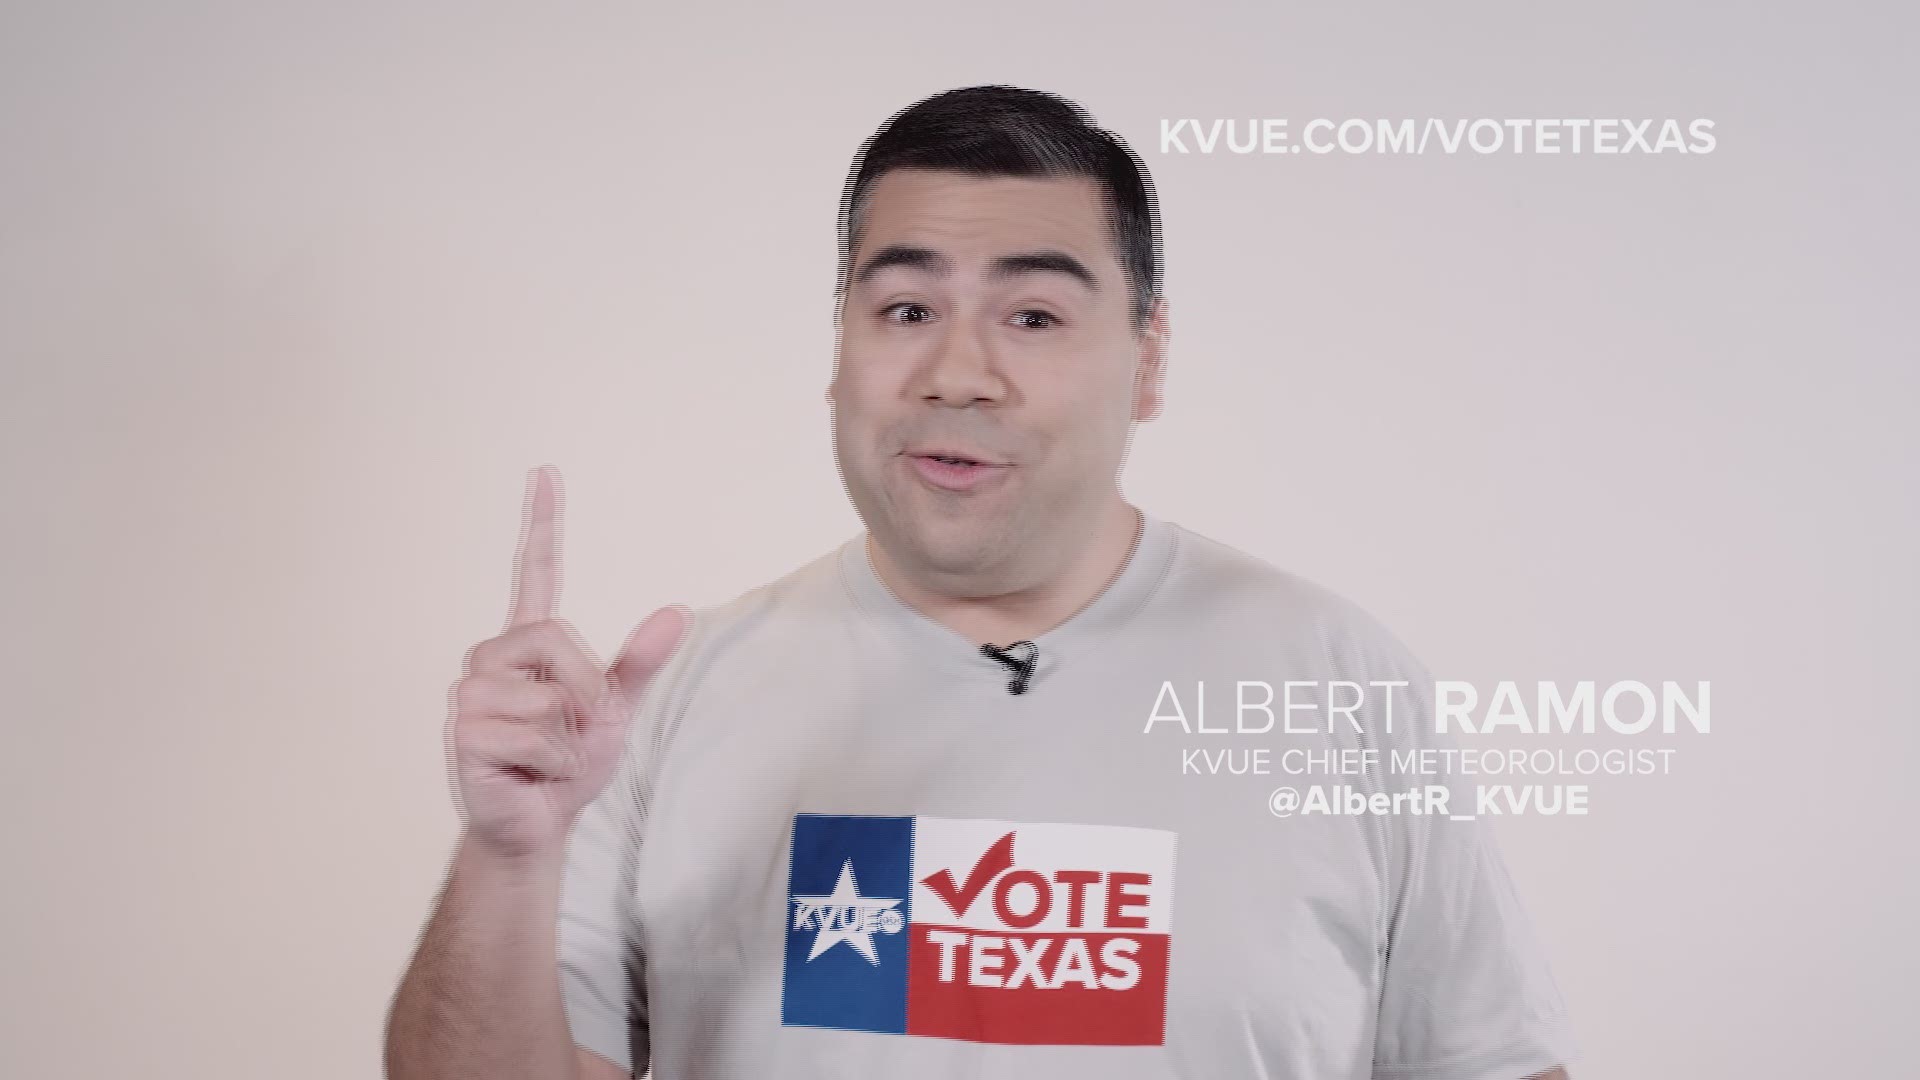 Early voting in the upcoming Texas election is Oct. 22 through Nov. 2. Election Day is Nov. 6. And KVUE wants you to vote.